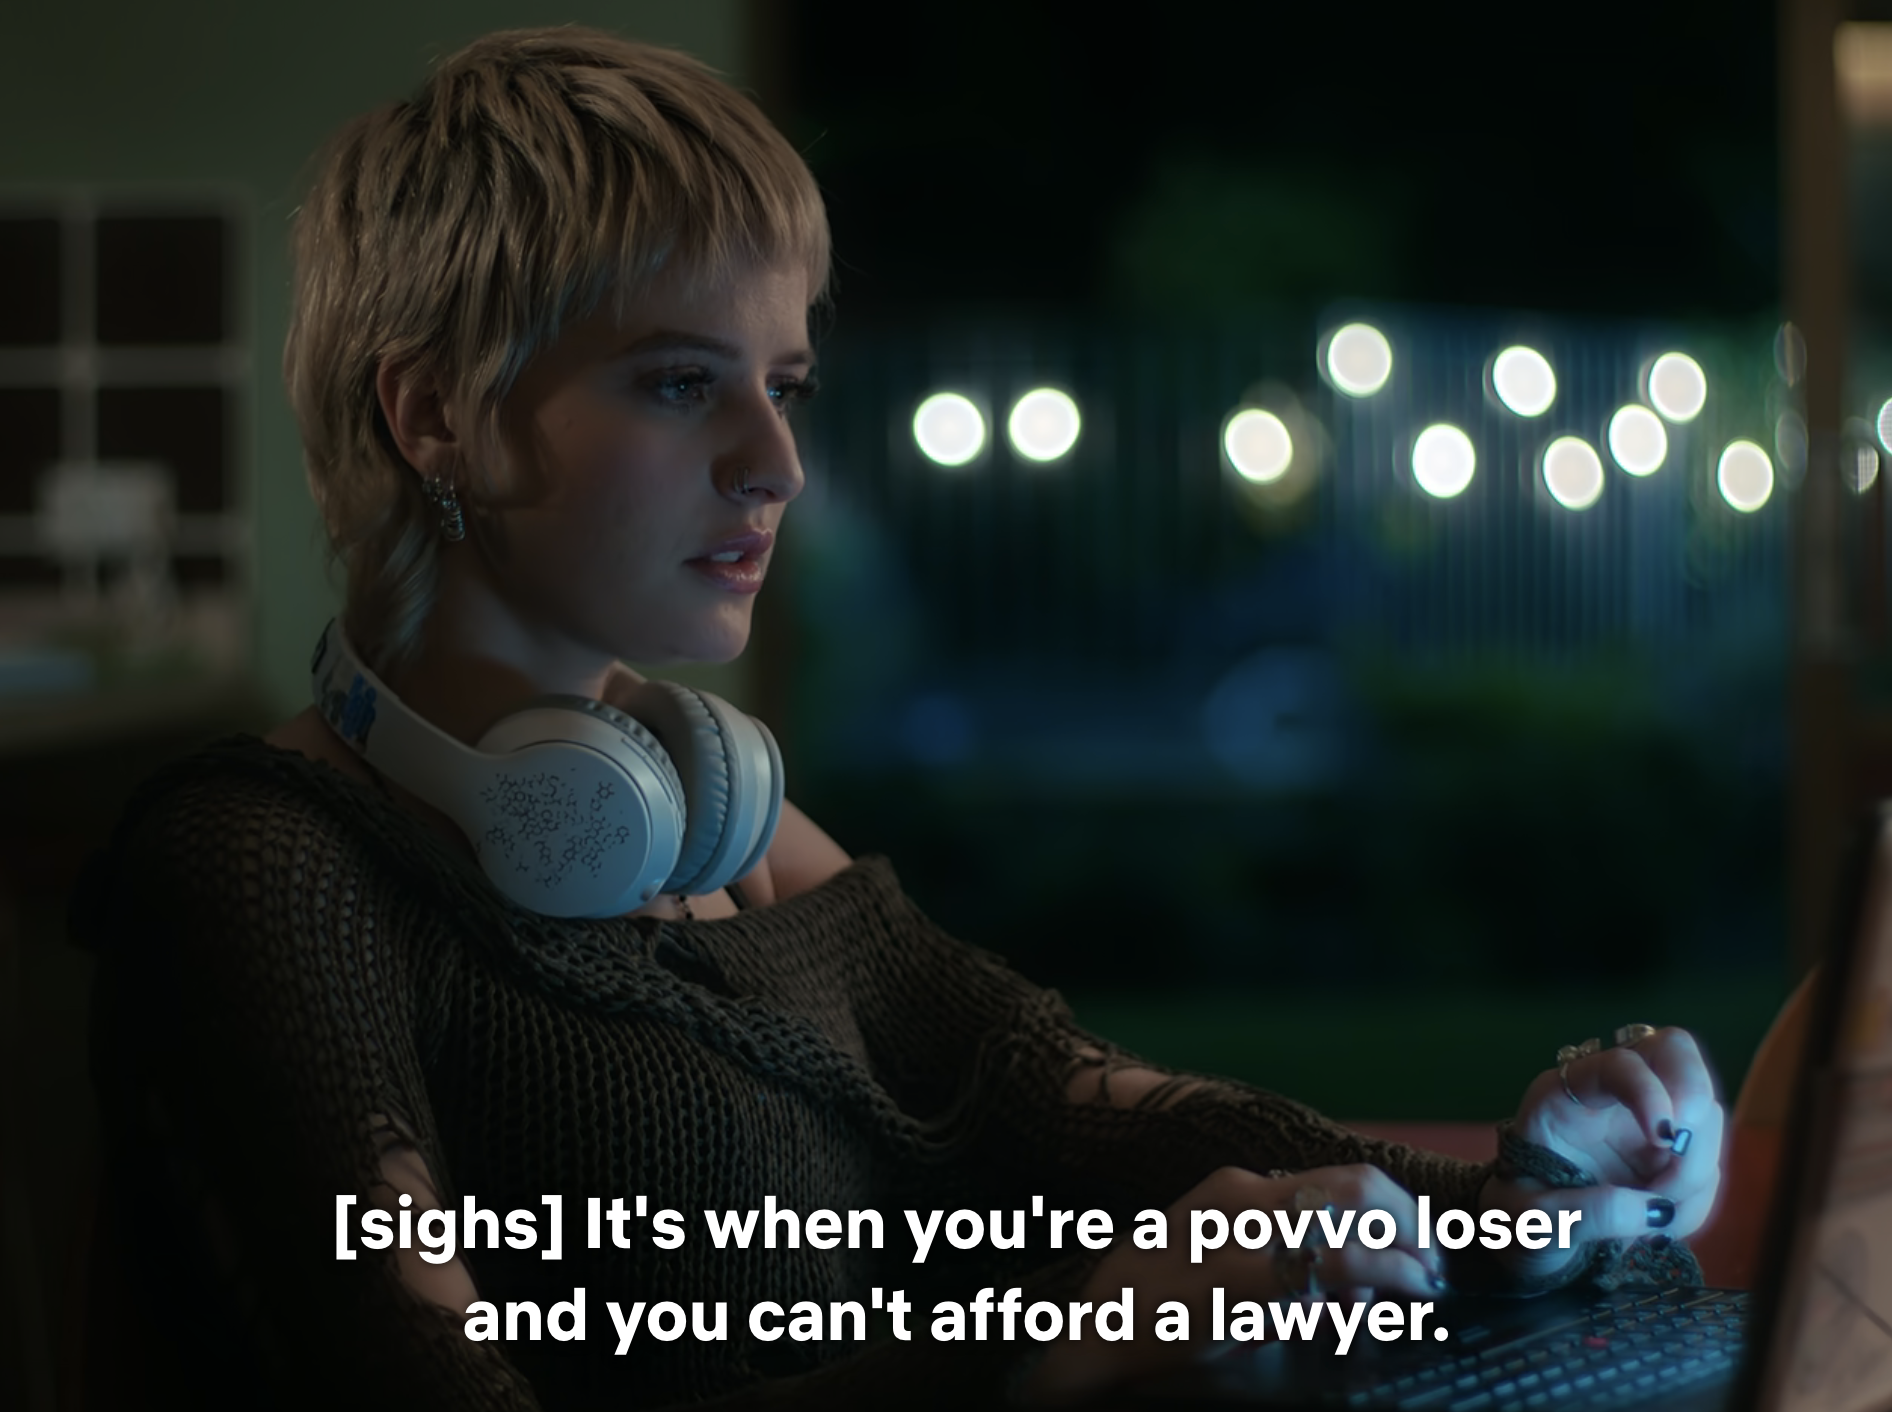 Woman with short hair wearing headphones looks contemplative with subtitle about affording a lawyer